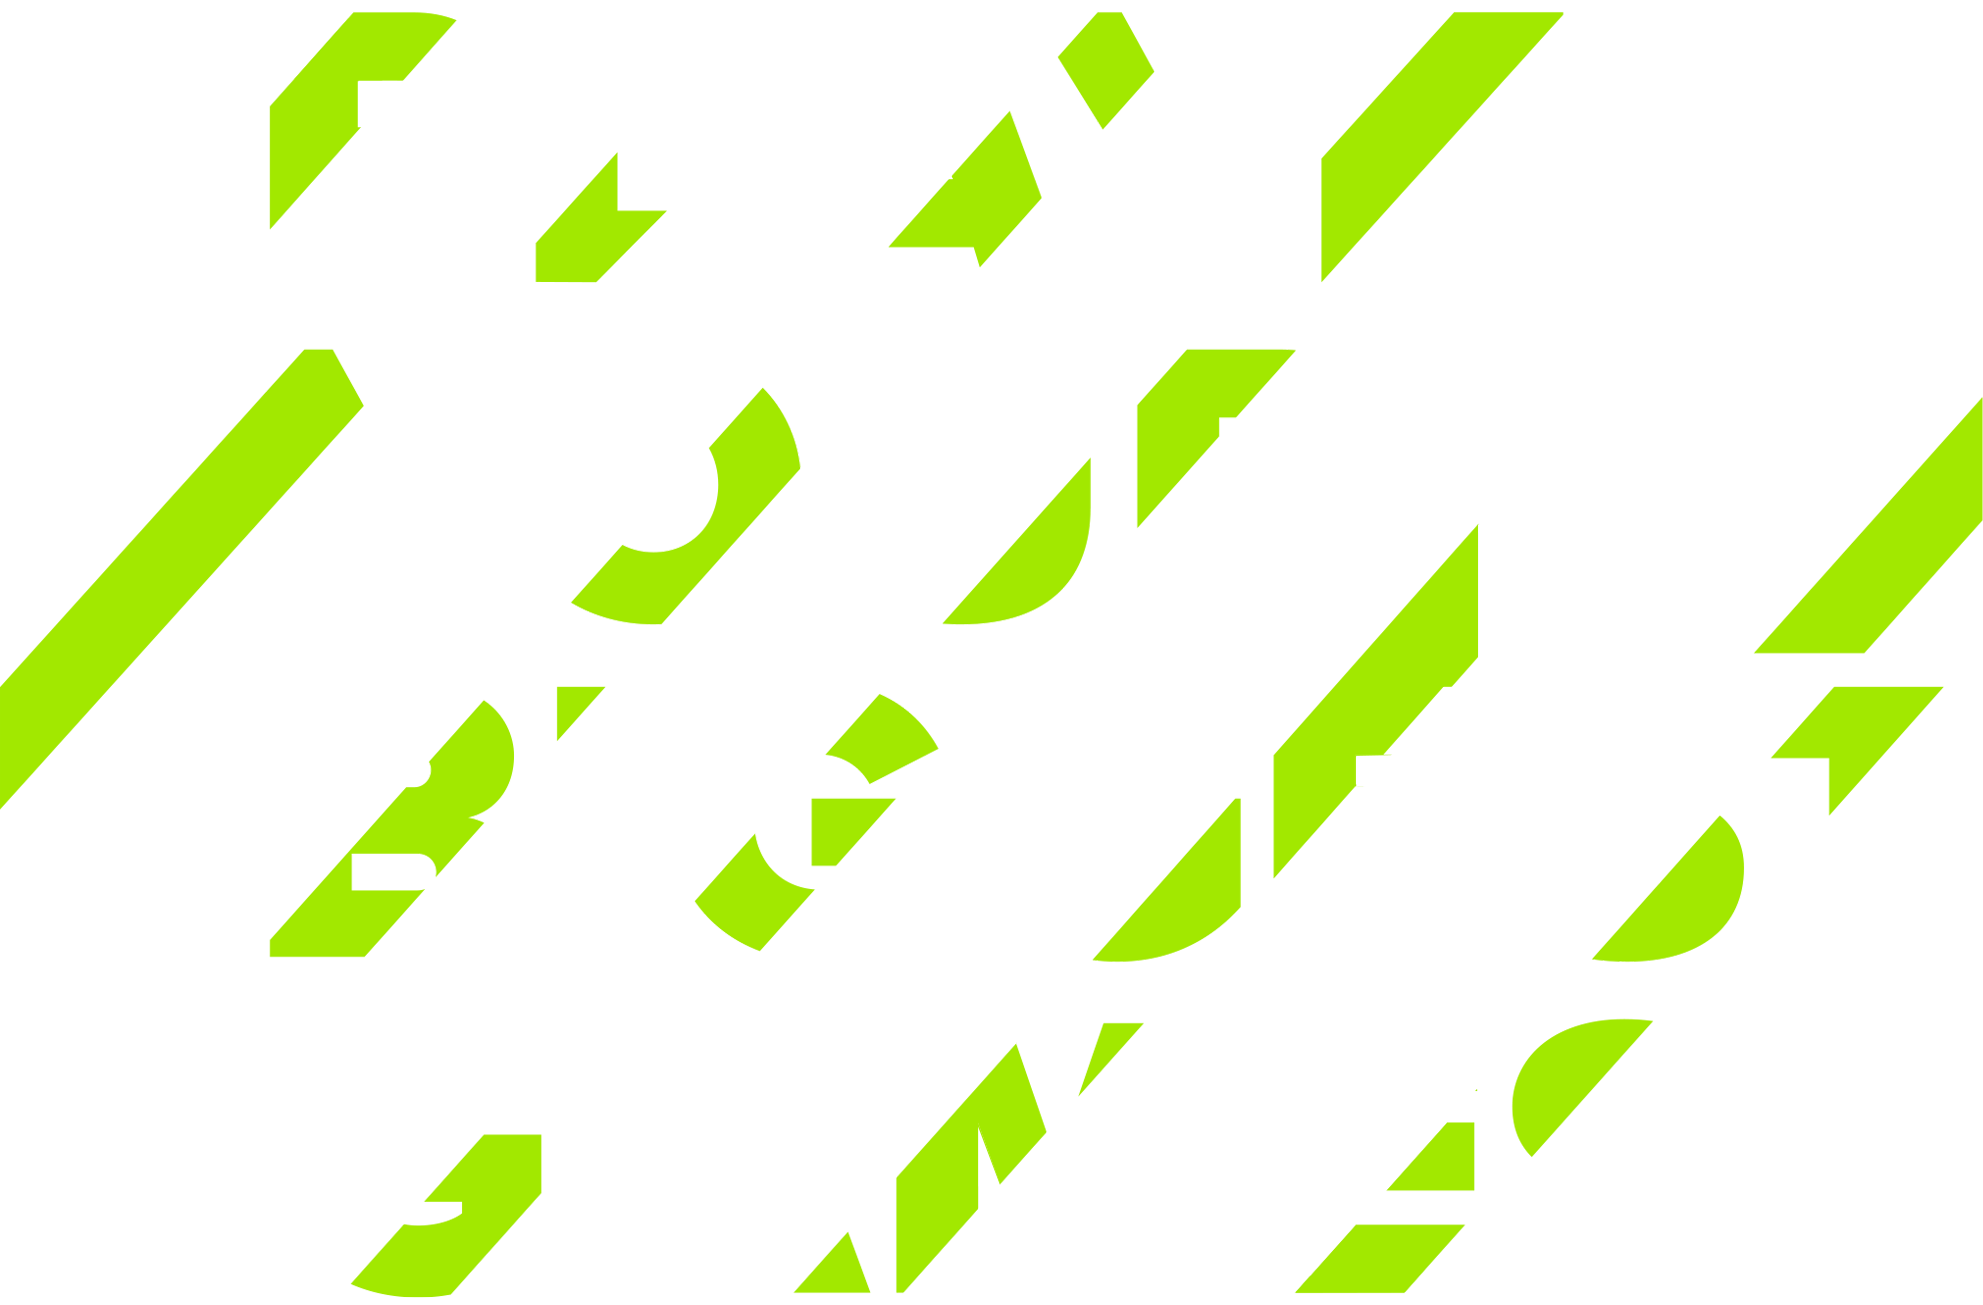 Play your biggest games